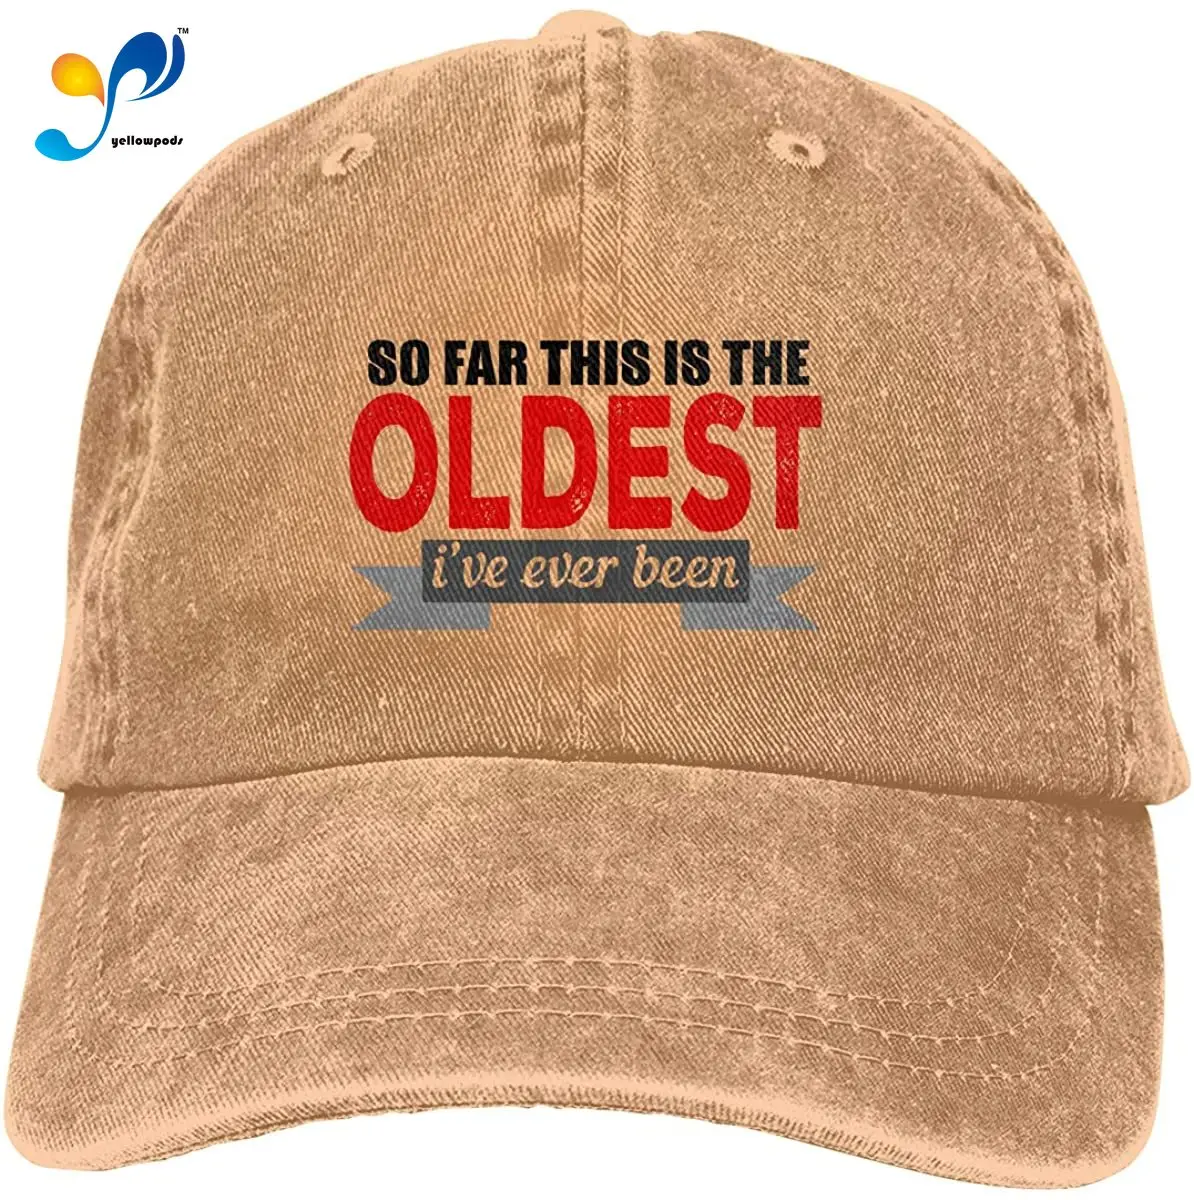 

This is The Oldest I've Ever Been Unisex Soft Casquette Cap Fashion Hat Vintage Adjustable Baseball Caps